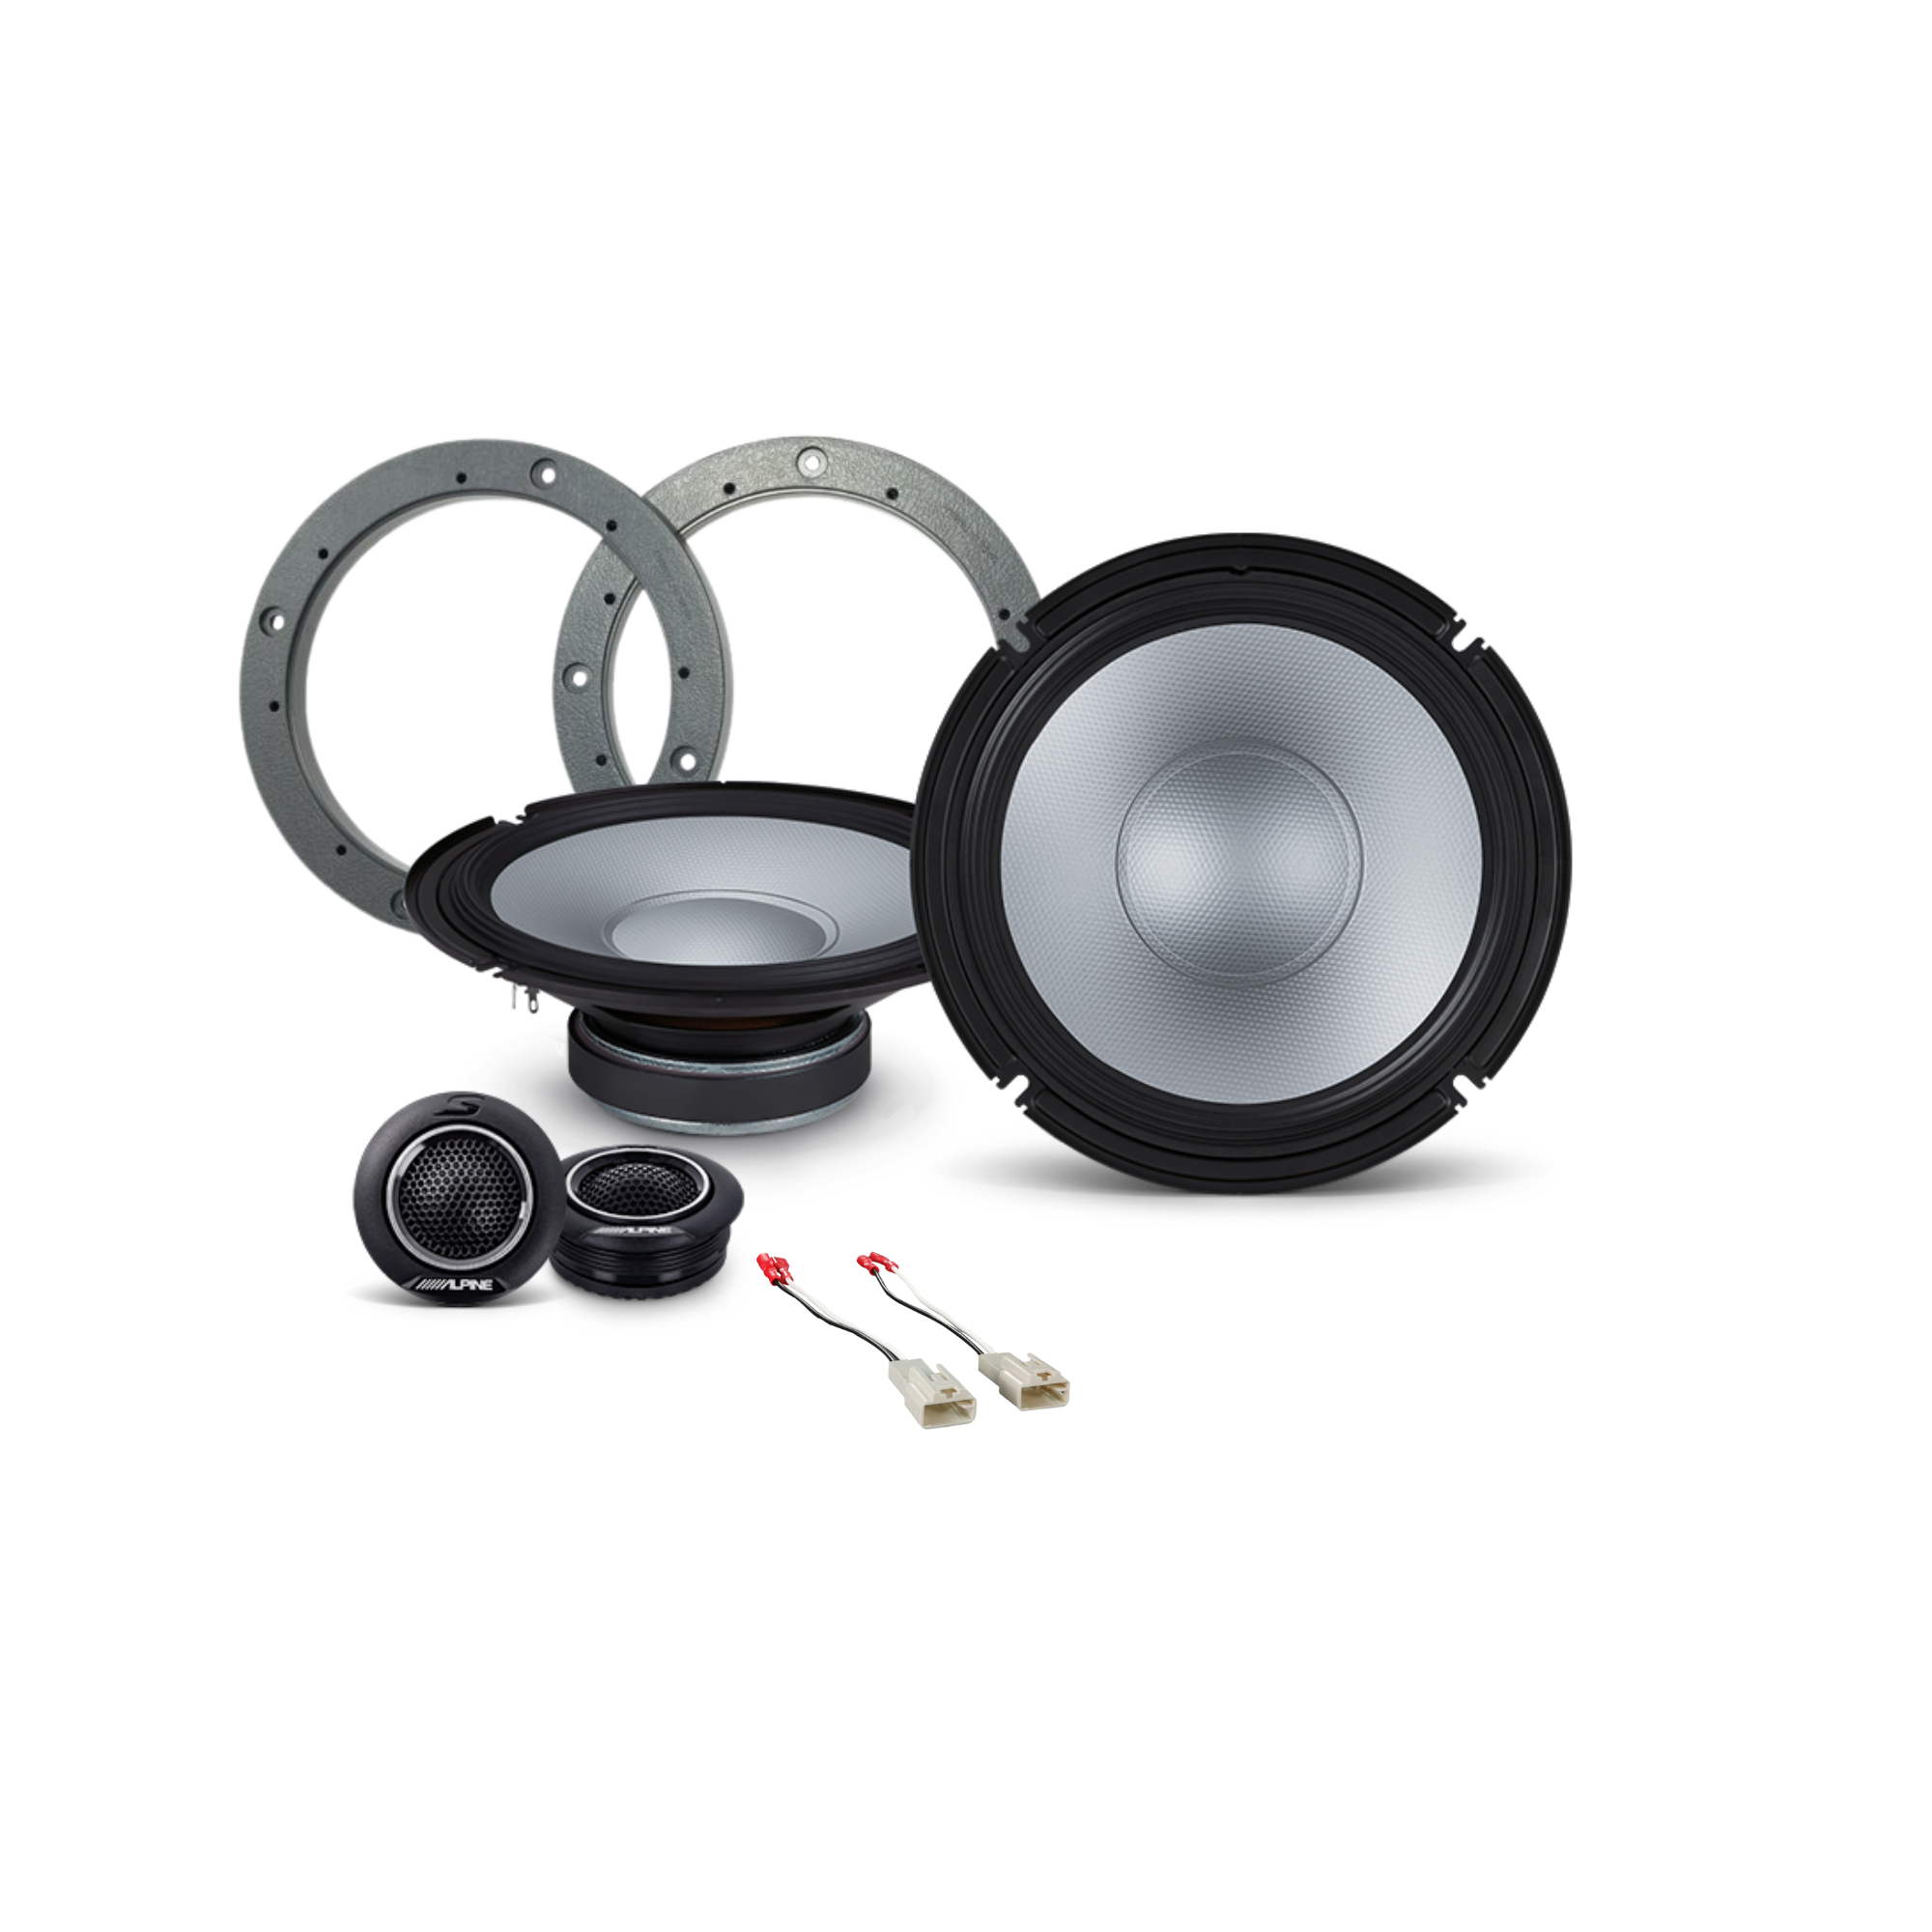 Toyota Hilux DIY 8" Component Speakers Upgrade